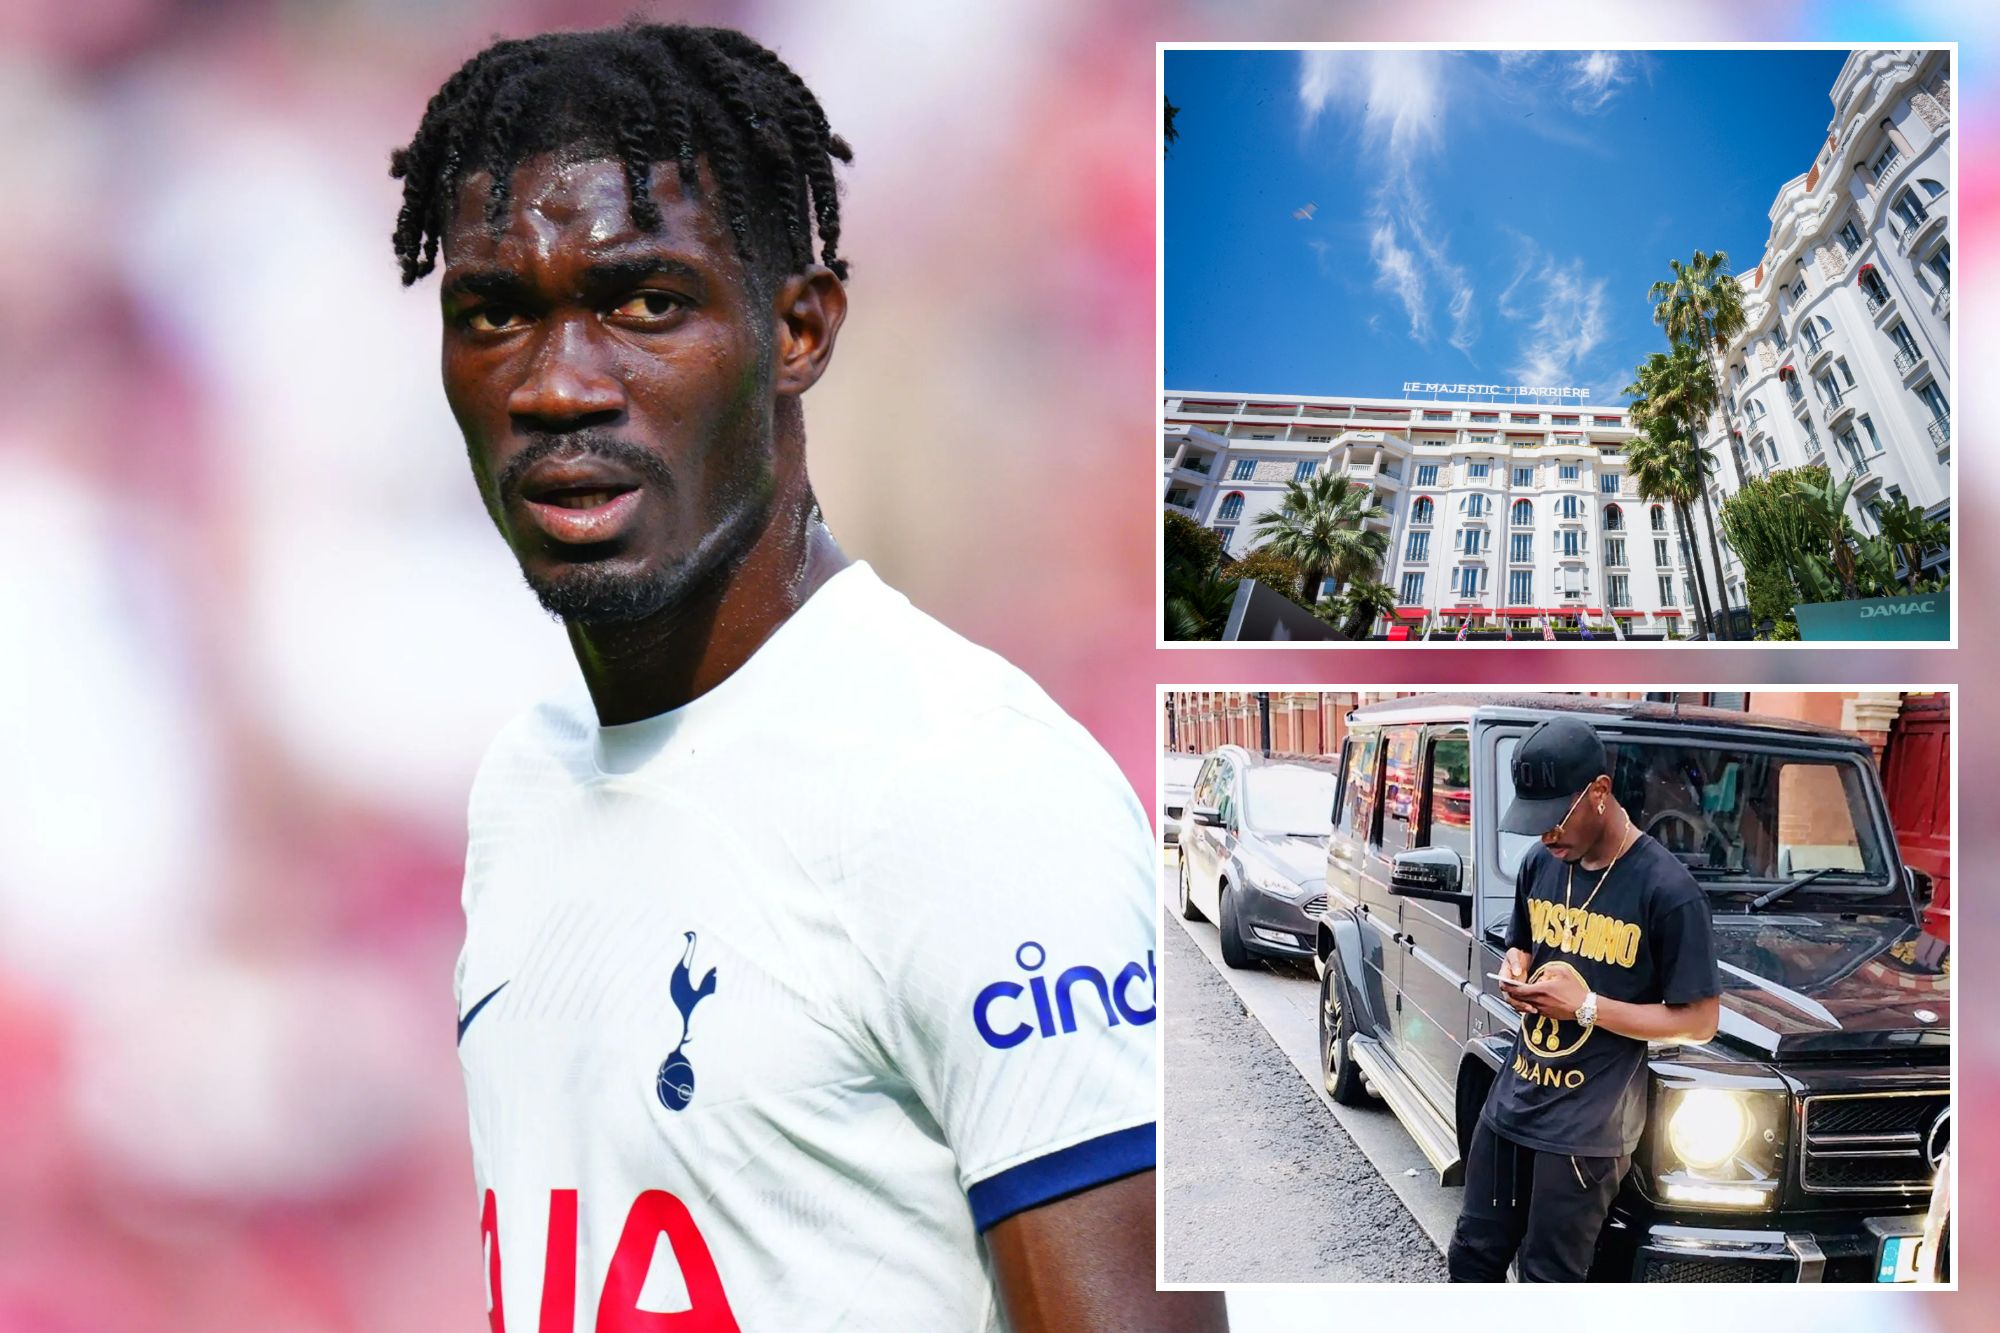 Spurs star sprayed with tear gas as muggers make off with £260,000 watch